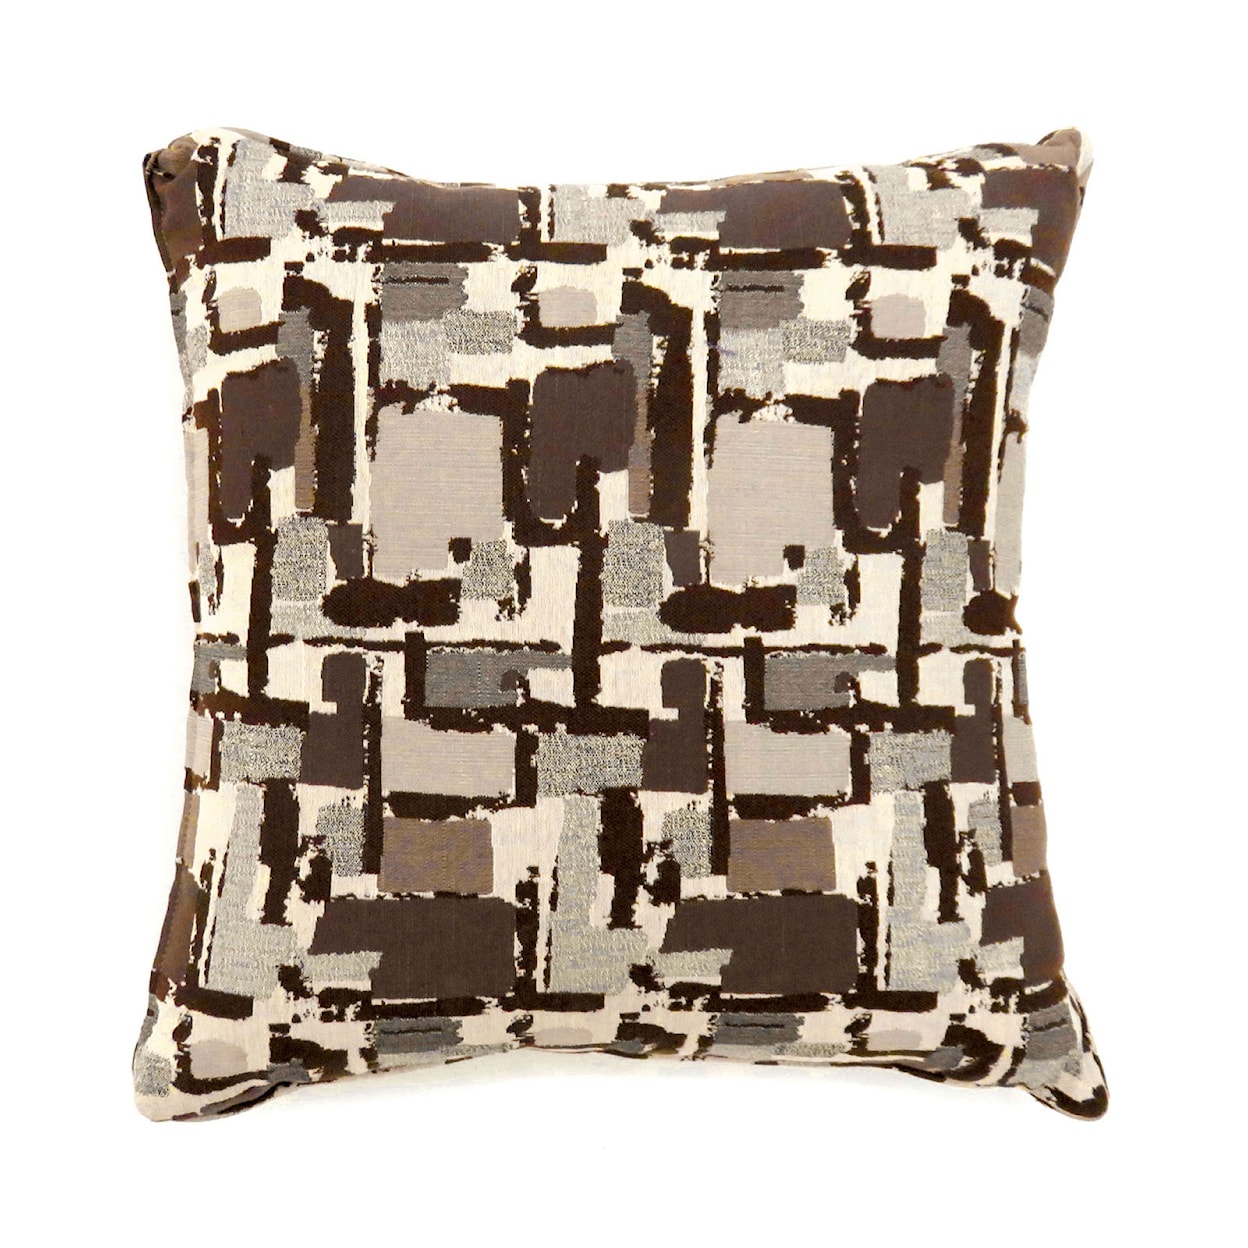 Furniture of America Concrit 17" X 17" Pillow, Brown (2/CTN)